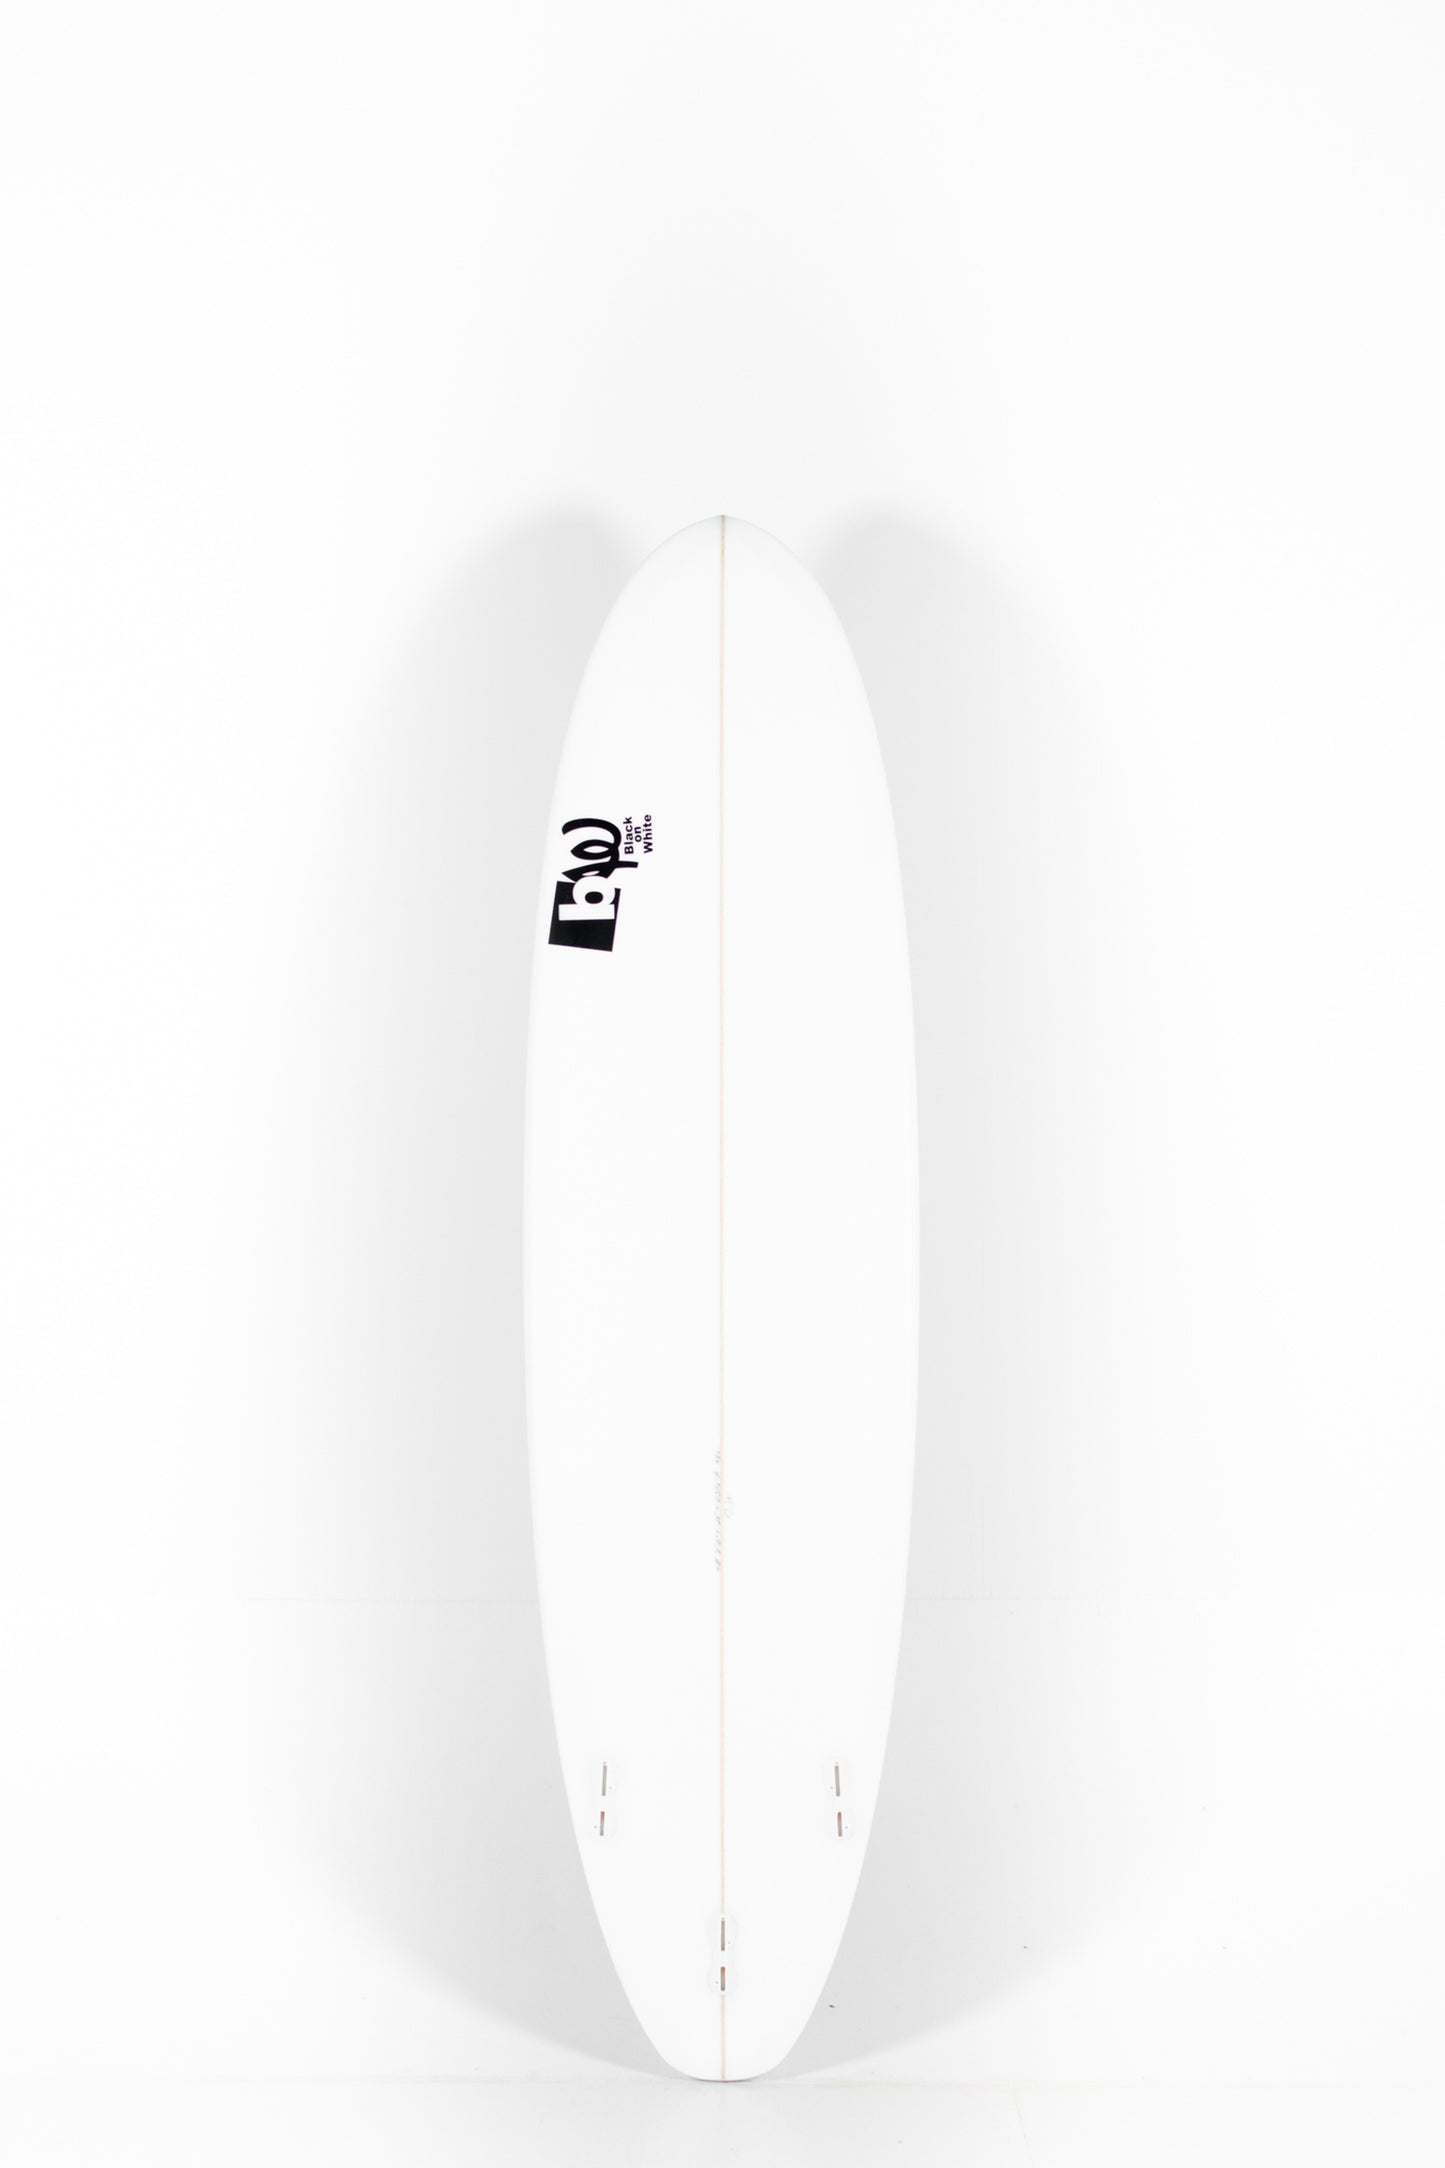 BW SURFBOARDS - BW SURFBOARDS Evolutivo 7'0" x 21 x 2 3/4 x 49L. at PUKAS SURF SHOP